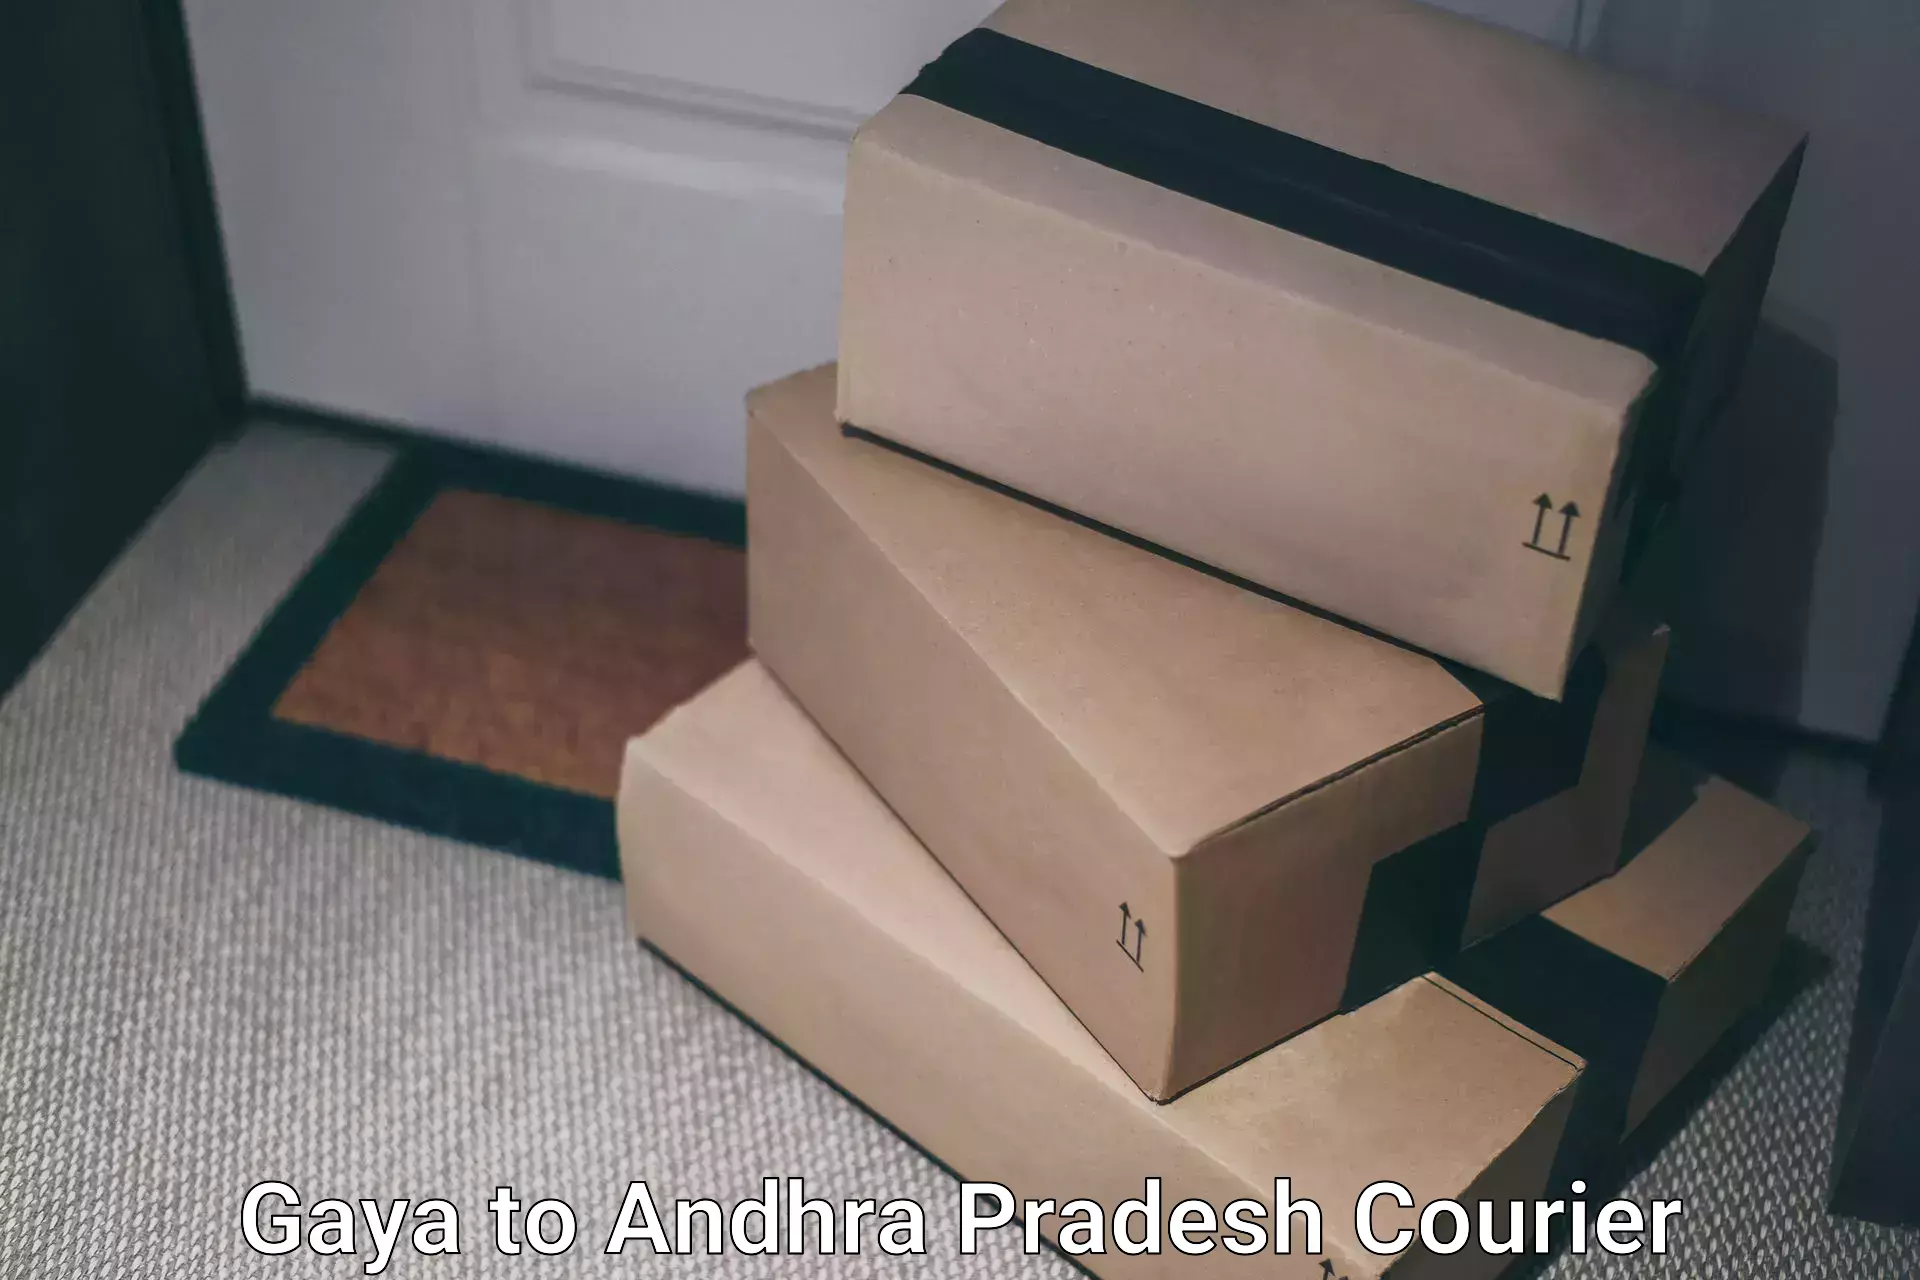 Multi-service courier options Gaya to Visakhapatnam